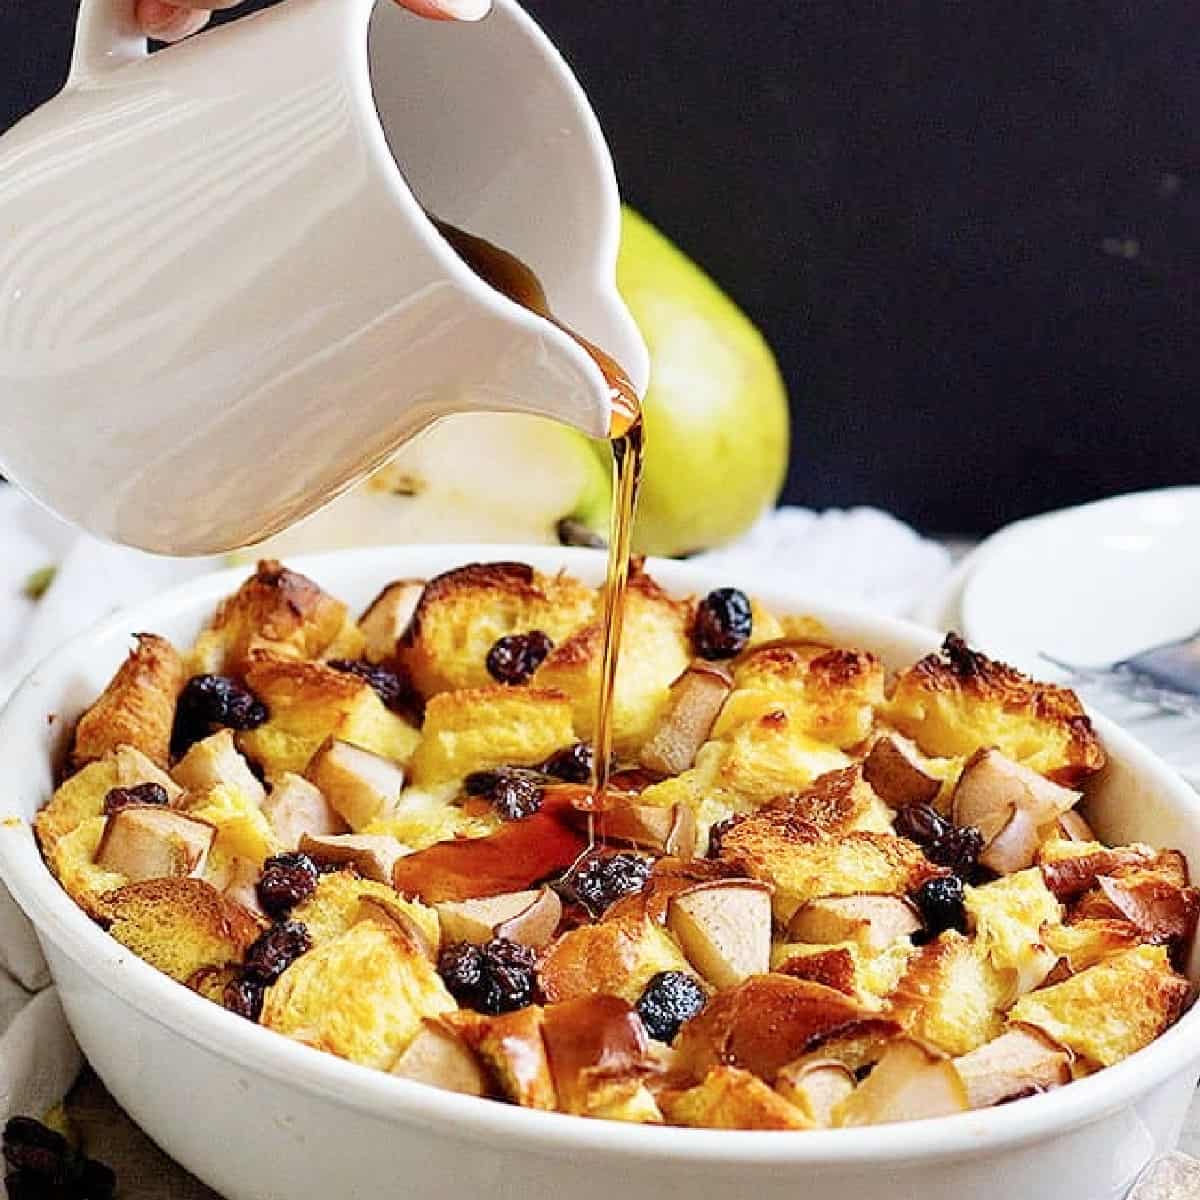 Nothing beats a delicious Challah Bread Pudding for breakfast or brunch! Soft Challah bread mixed with pears and raisins with a touch of cardamom brings a feast of flavors to your table!
